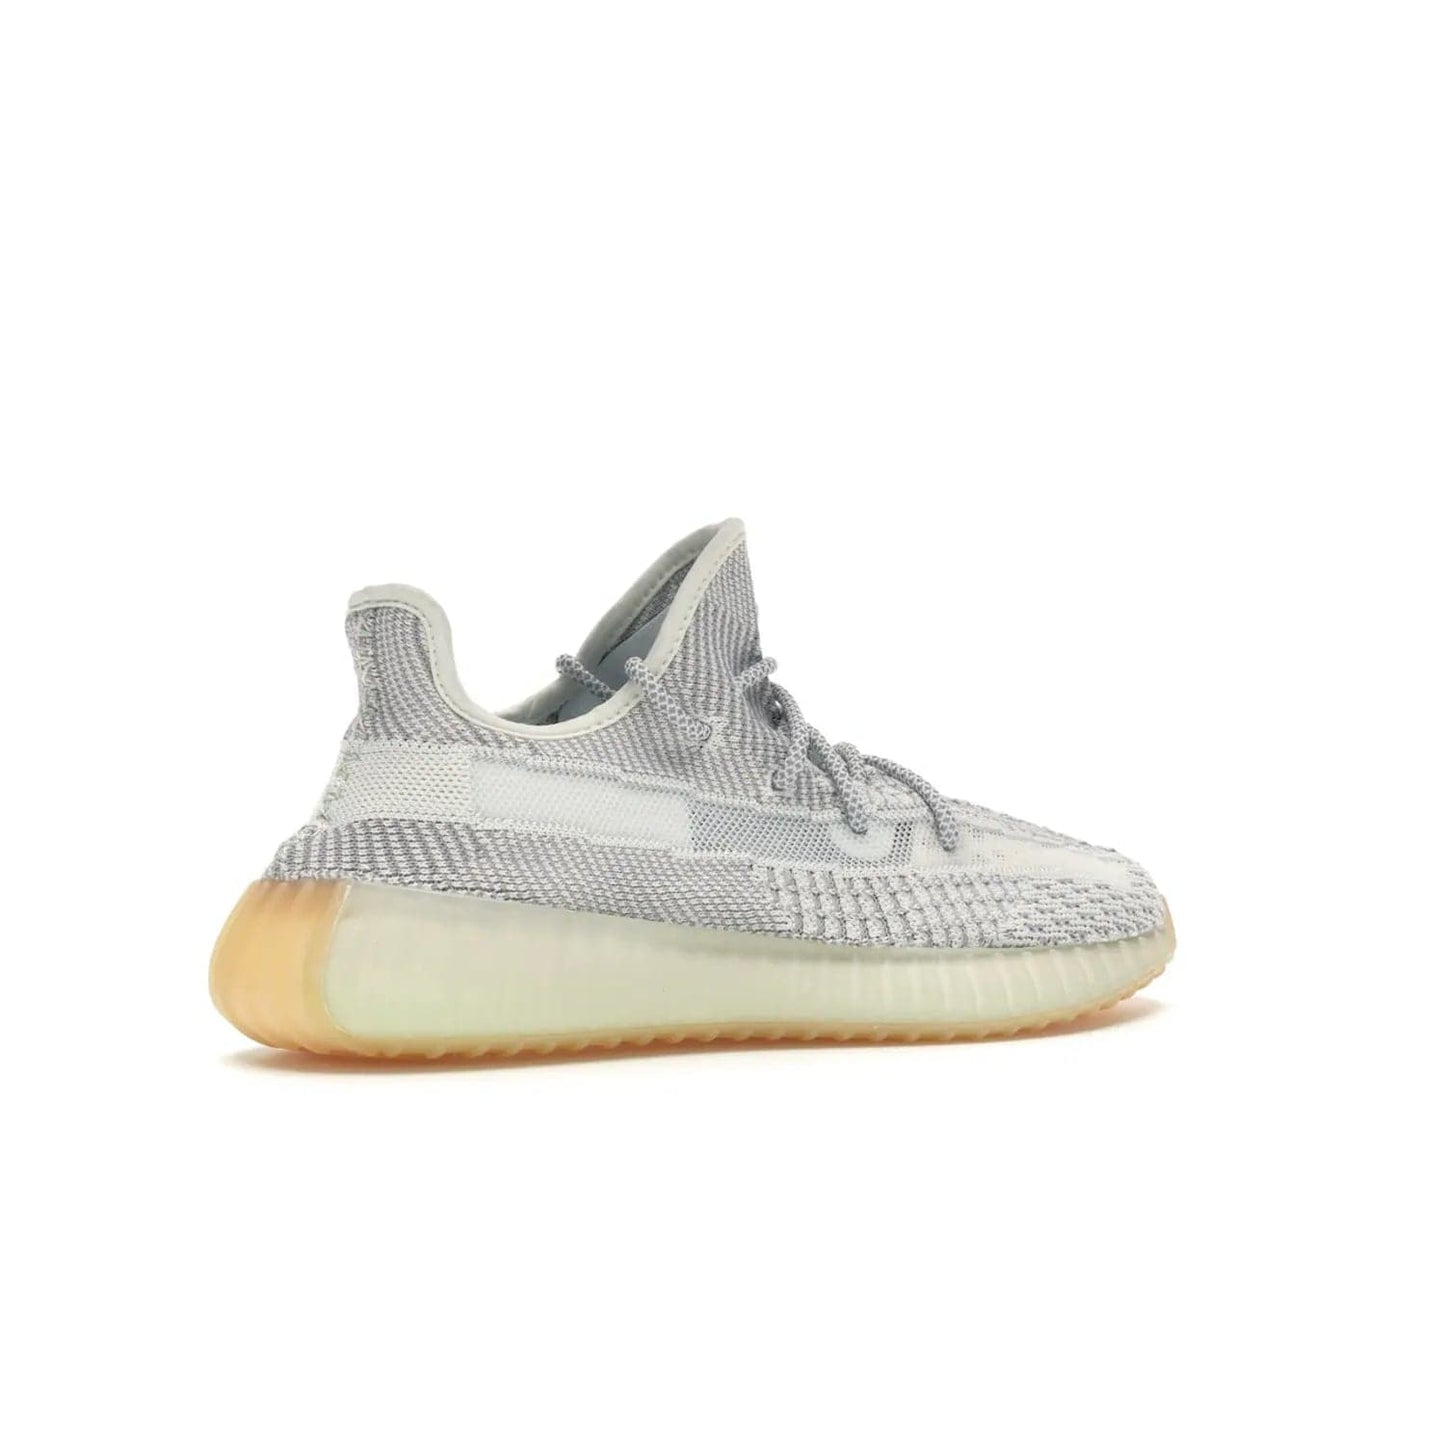 adidas Yeezy Boost 350 V2 Yeshaya (Non-Reflective) - Image 34 - Only at www.BallersClubKickz.com - Step out in style with the adidas Yeezy Boost 350 V2 Yeshaya (Non-Reflective). Gray-and-white Primeknit upper with mesh side stripe & rope laces, plus a translucent Boost sole with a hint of yellow. Make a statement and feel comfortable with this stylish sneaker.